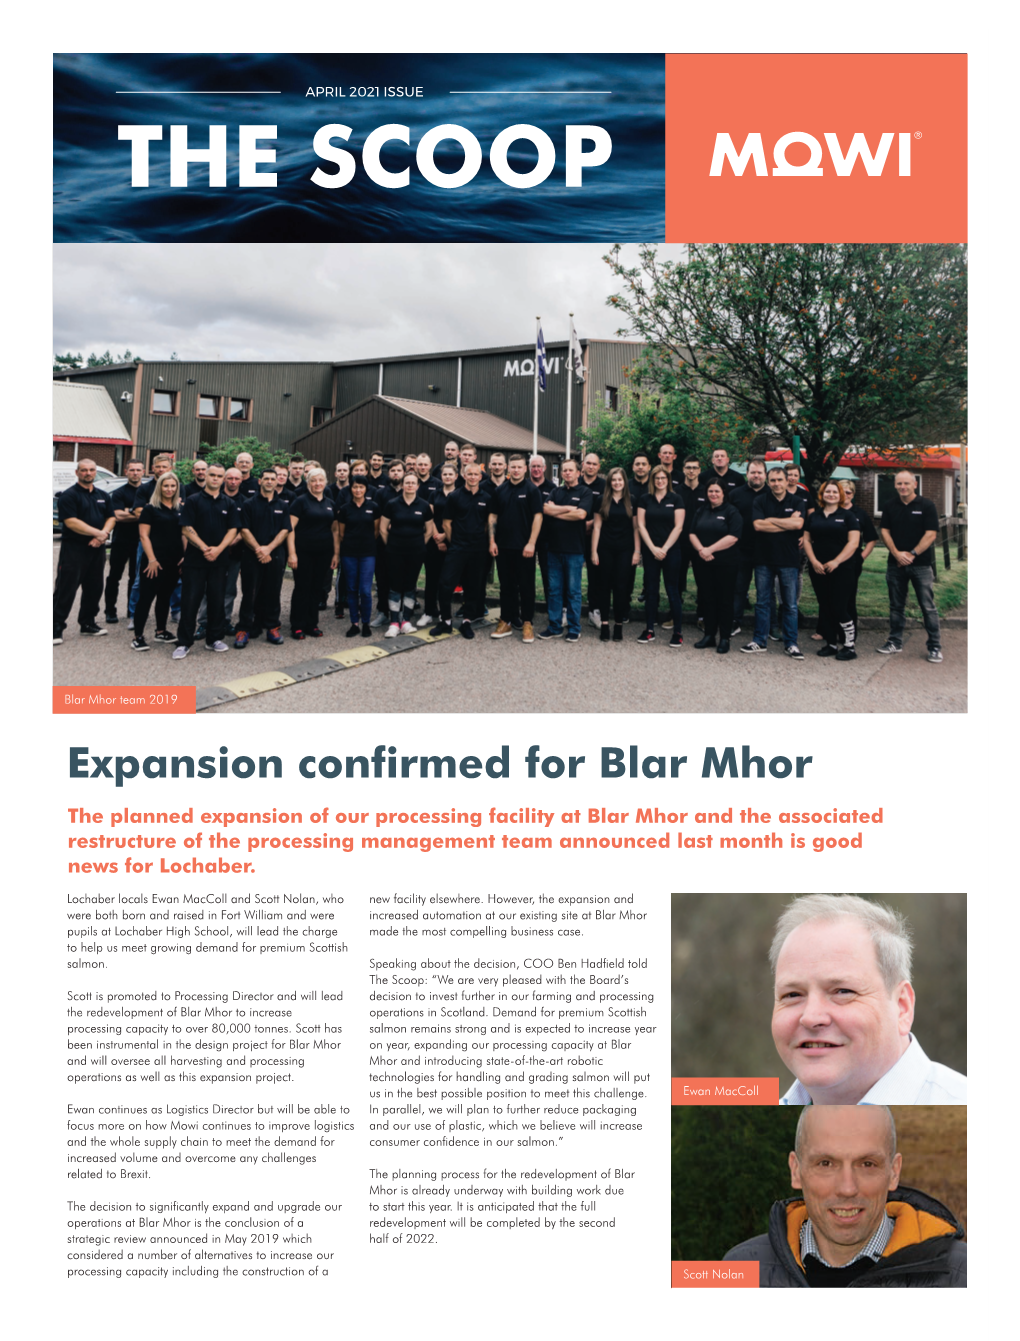 Expansion Confirmed for Blar Mhor